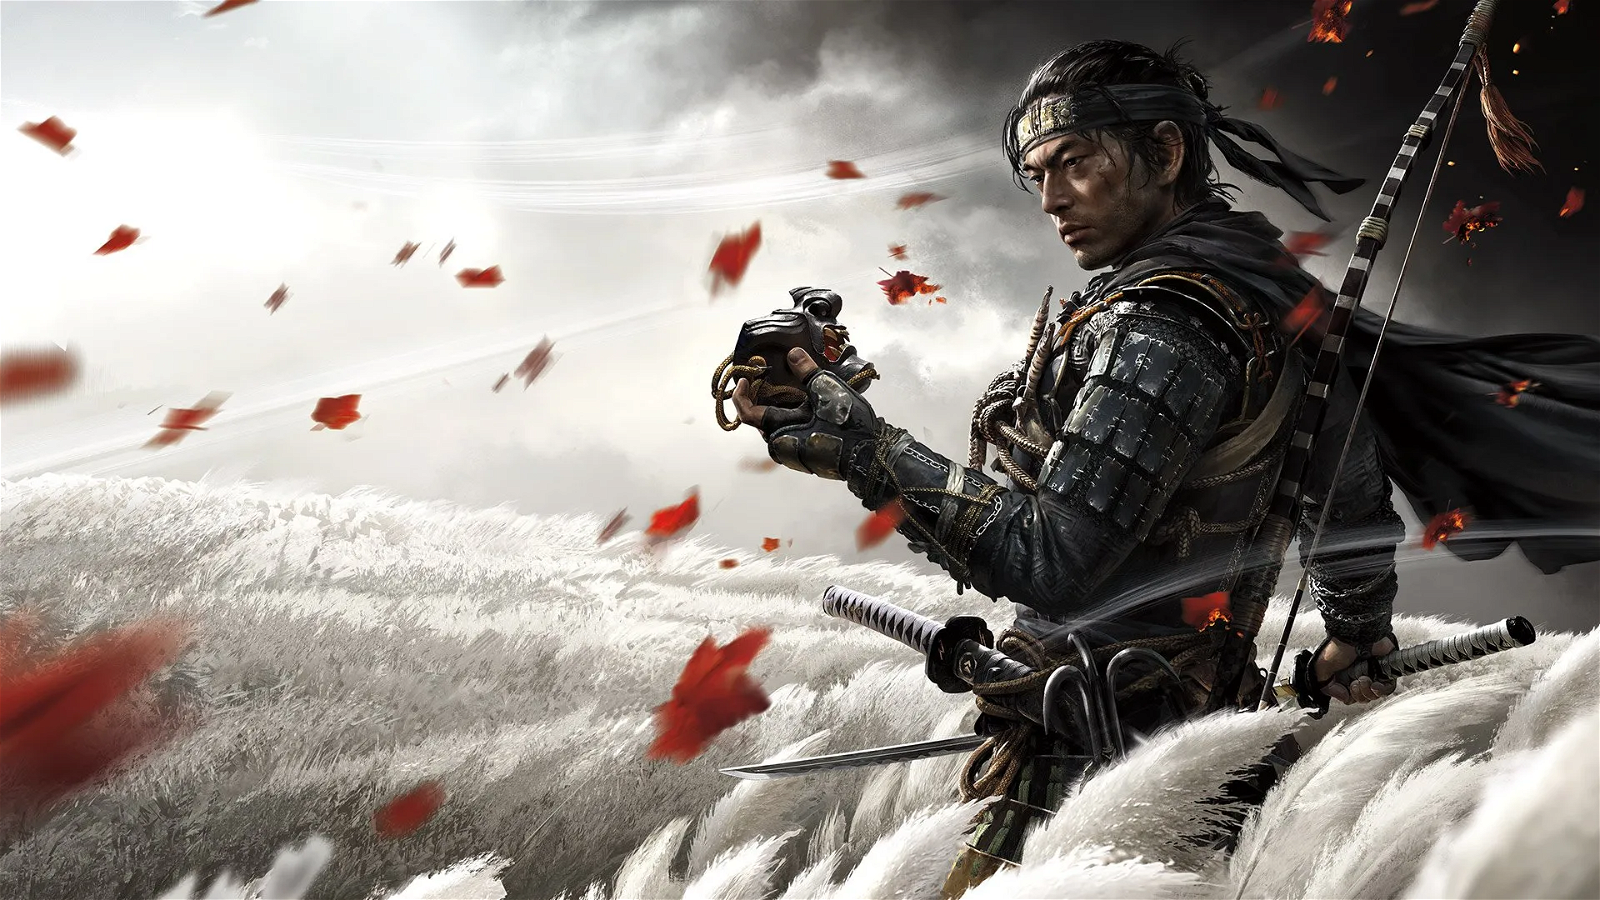 A promotional for Ghost of Tsushima